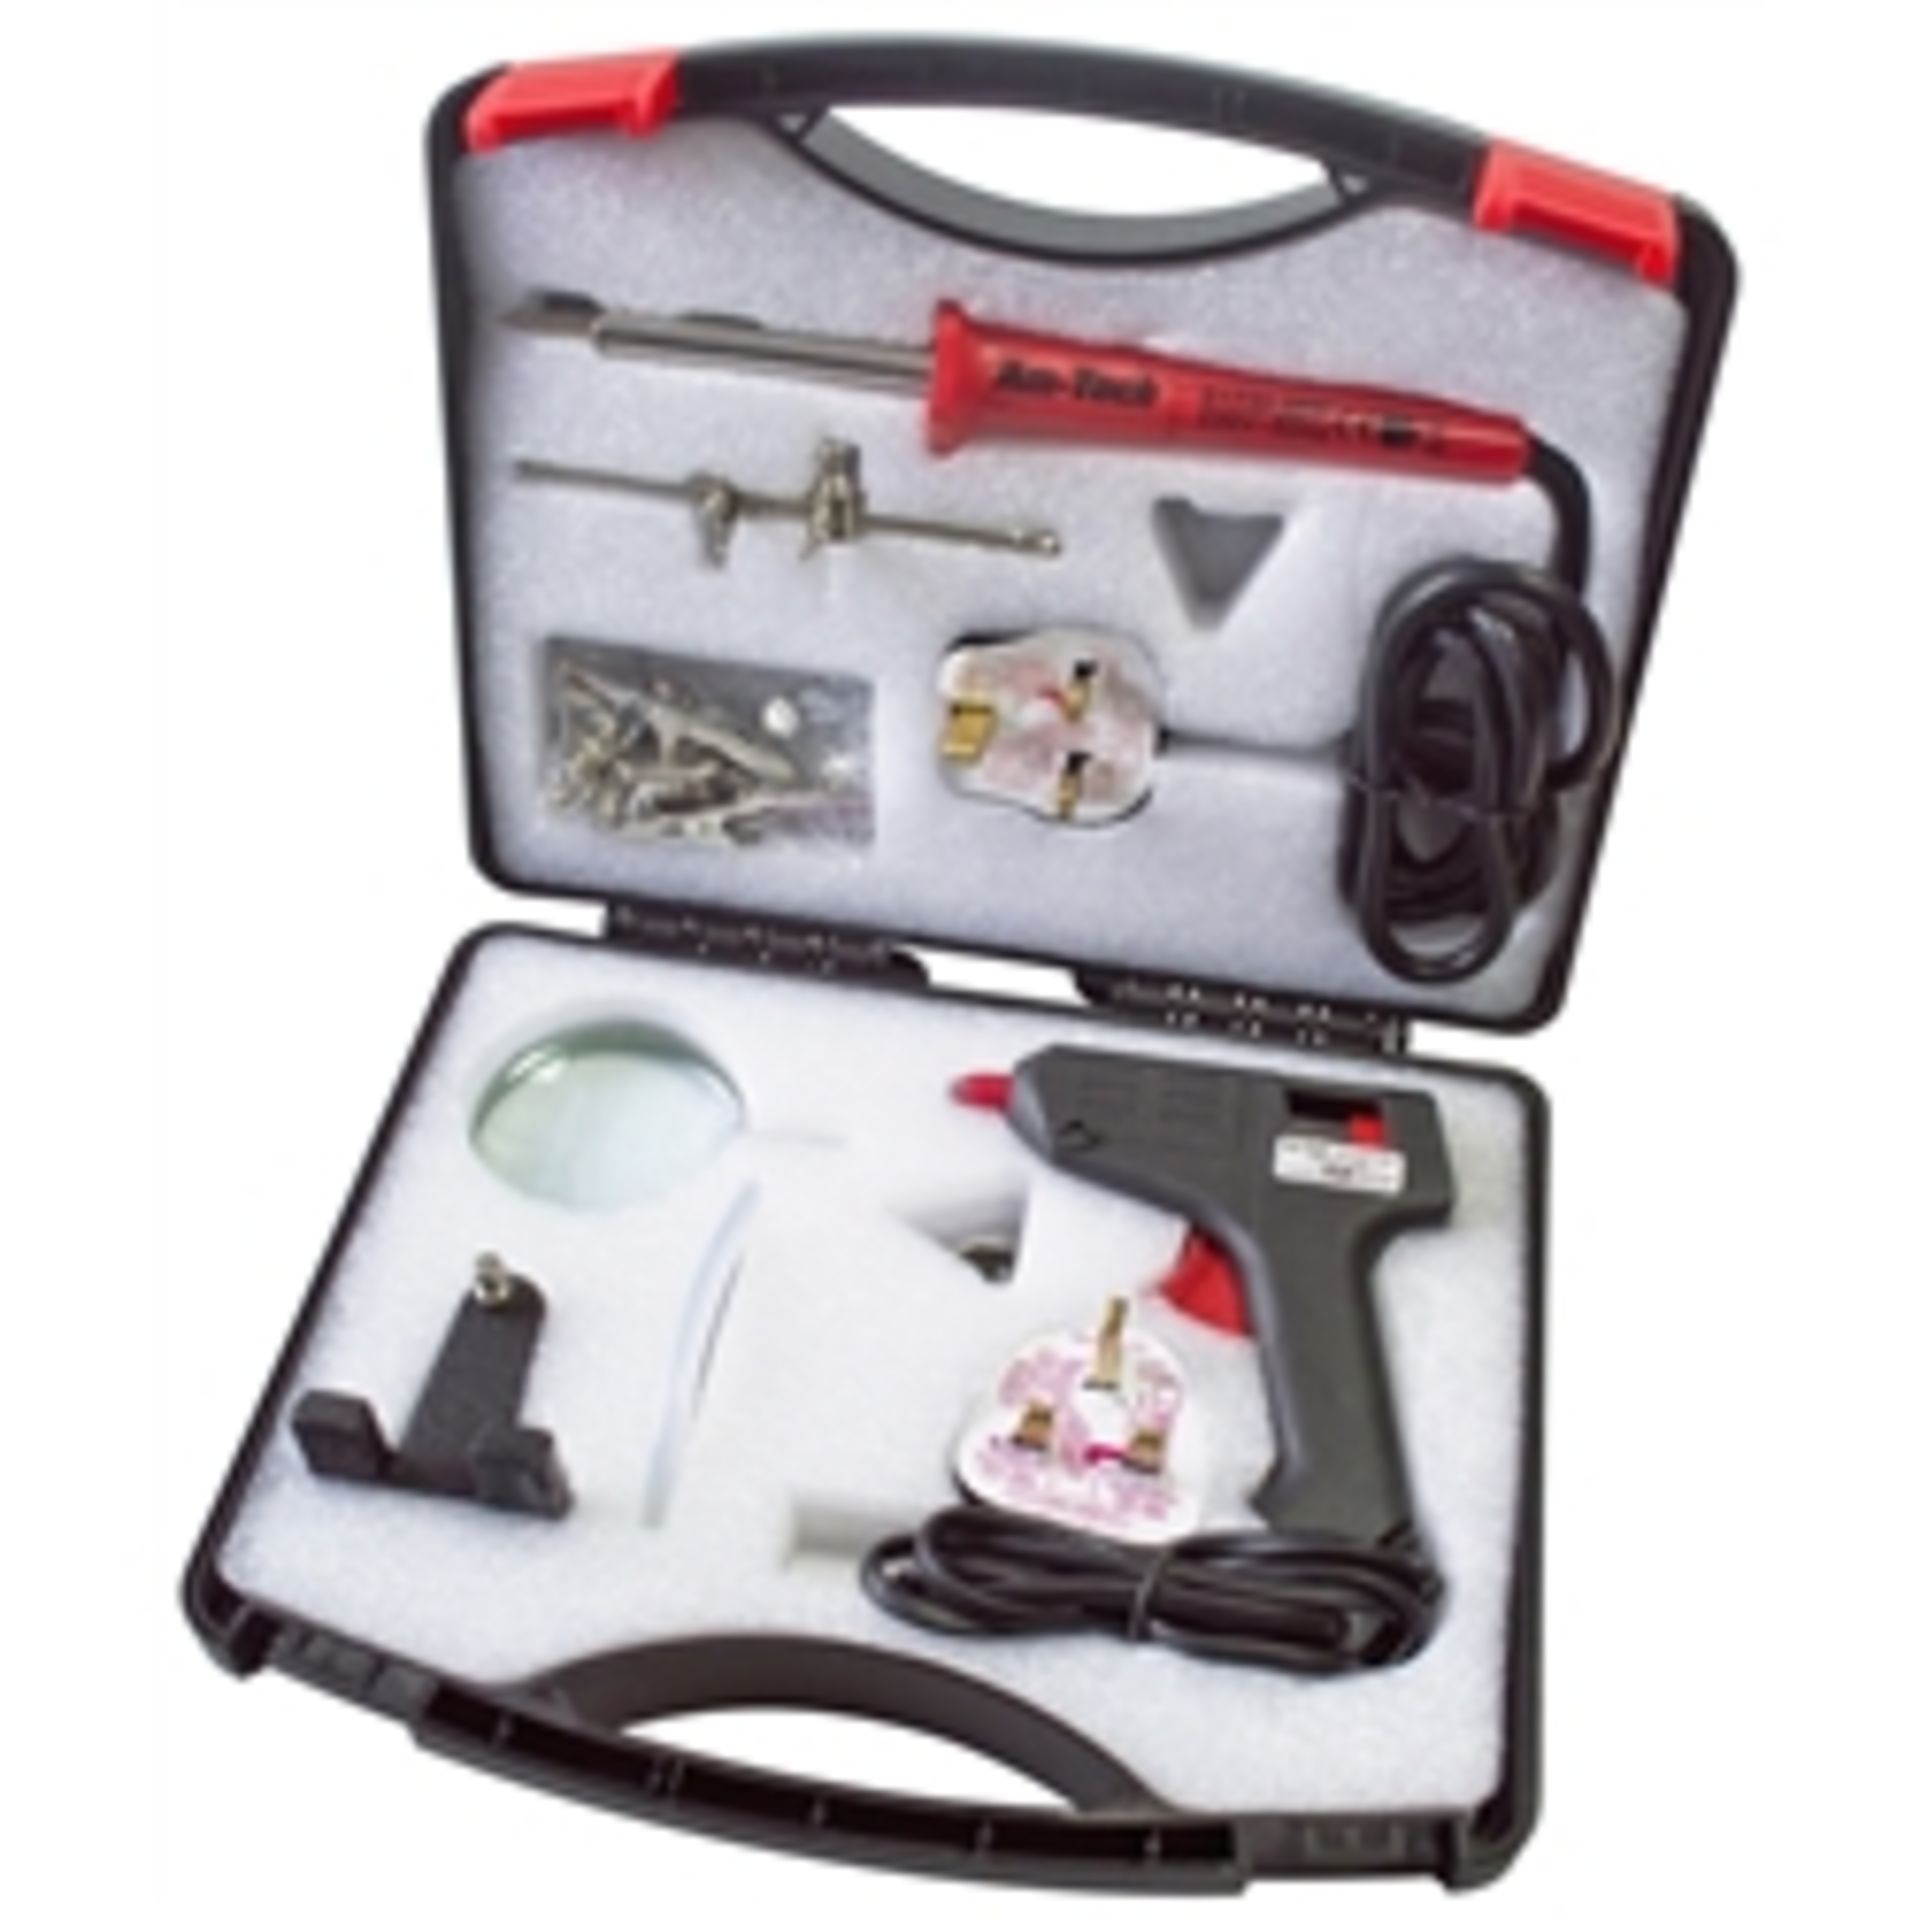 V  Grade A Soldering Gun With Accessories In Carry Case - Image 2 of 2